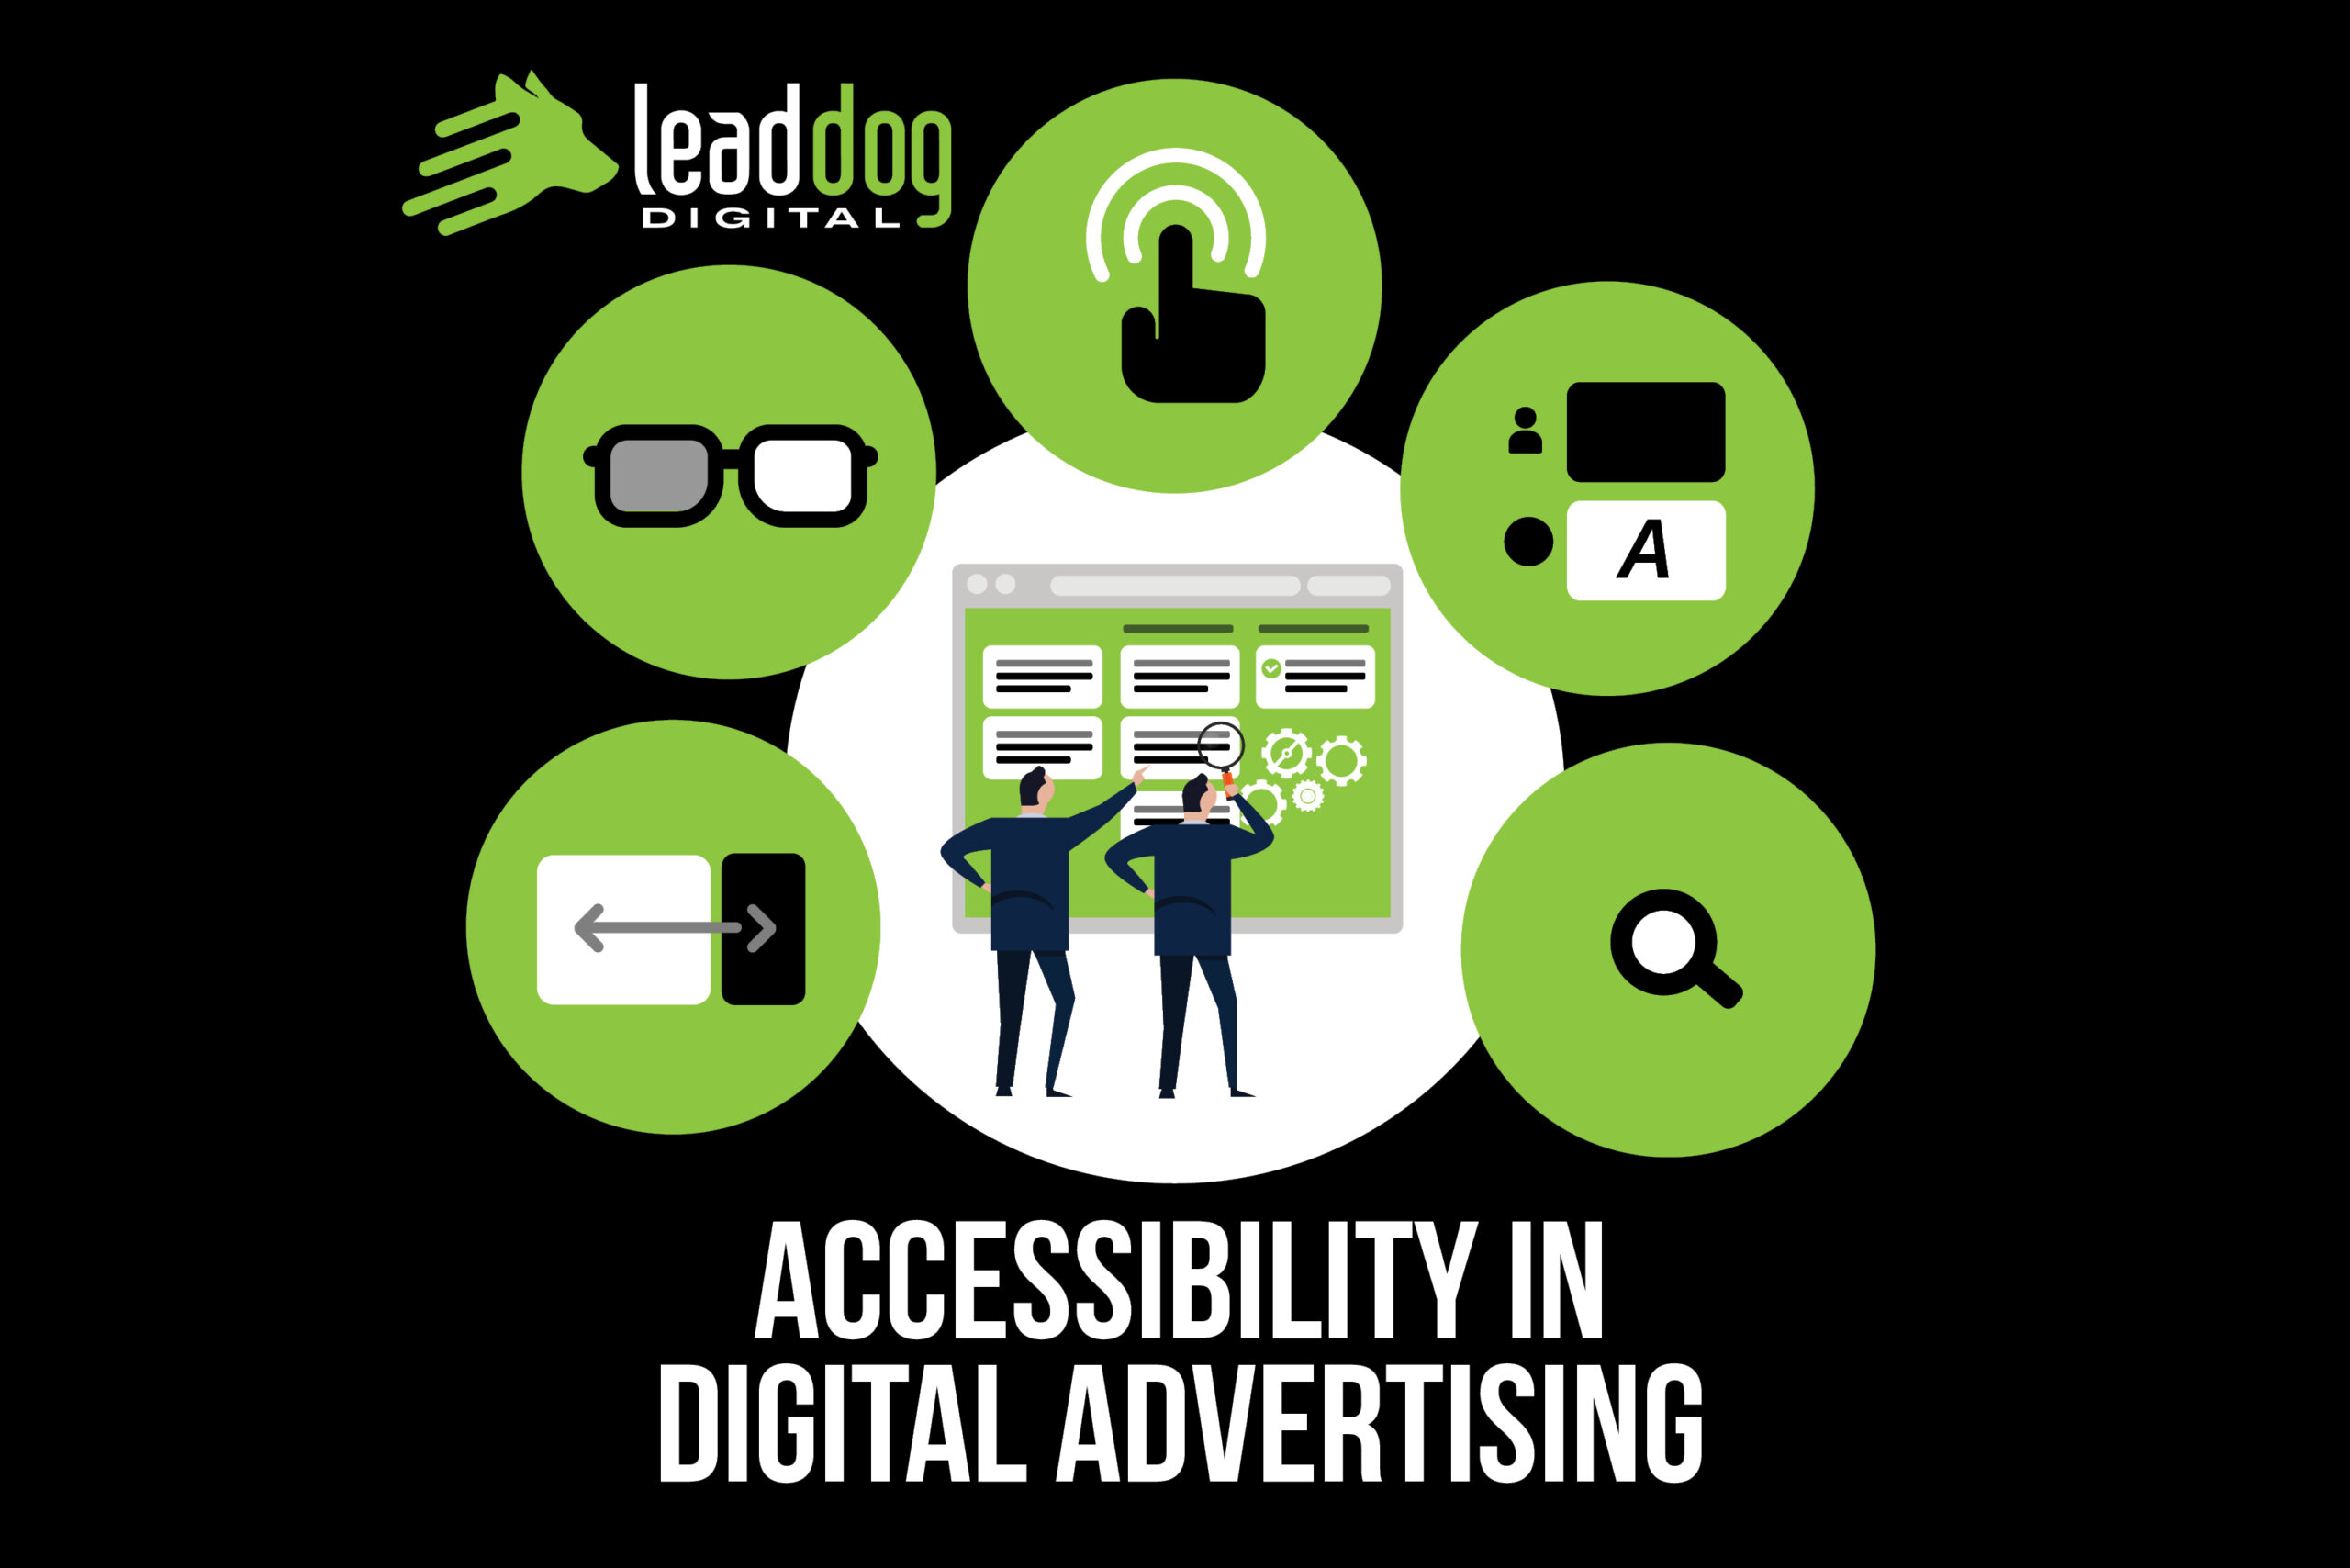 An illustration with the Lead Dog Digital Logo highlights the importance of inclusive design and user-friendly features to enhance accessibility in digital advertising.